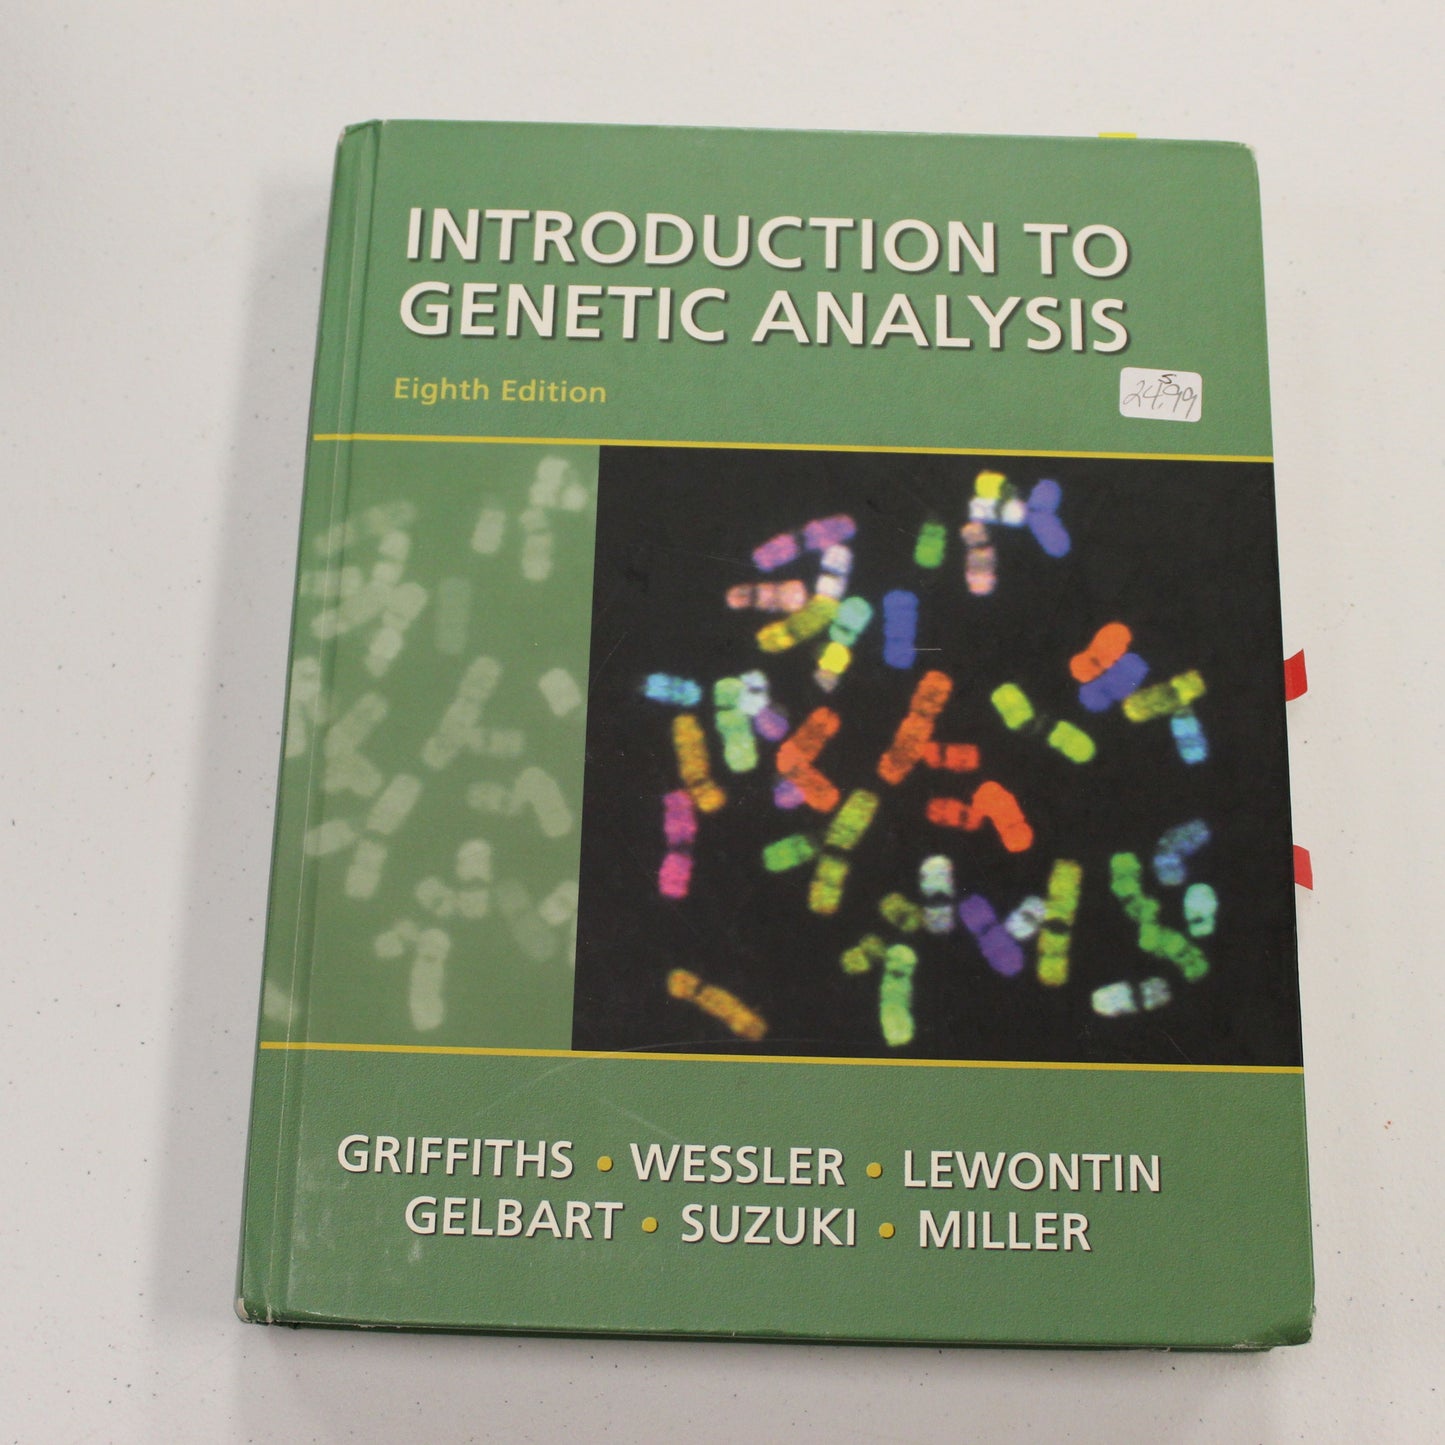 INTRODUCTION TO GENETIC ANALYSIS